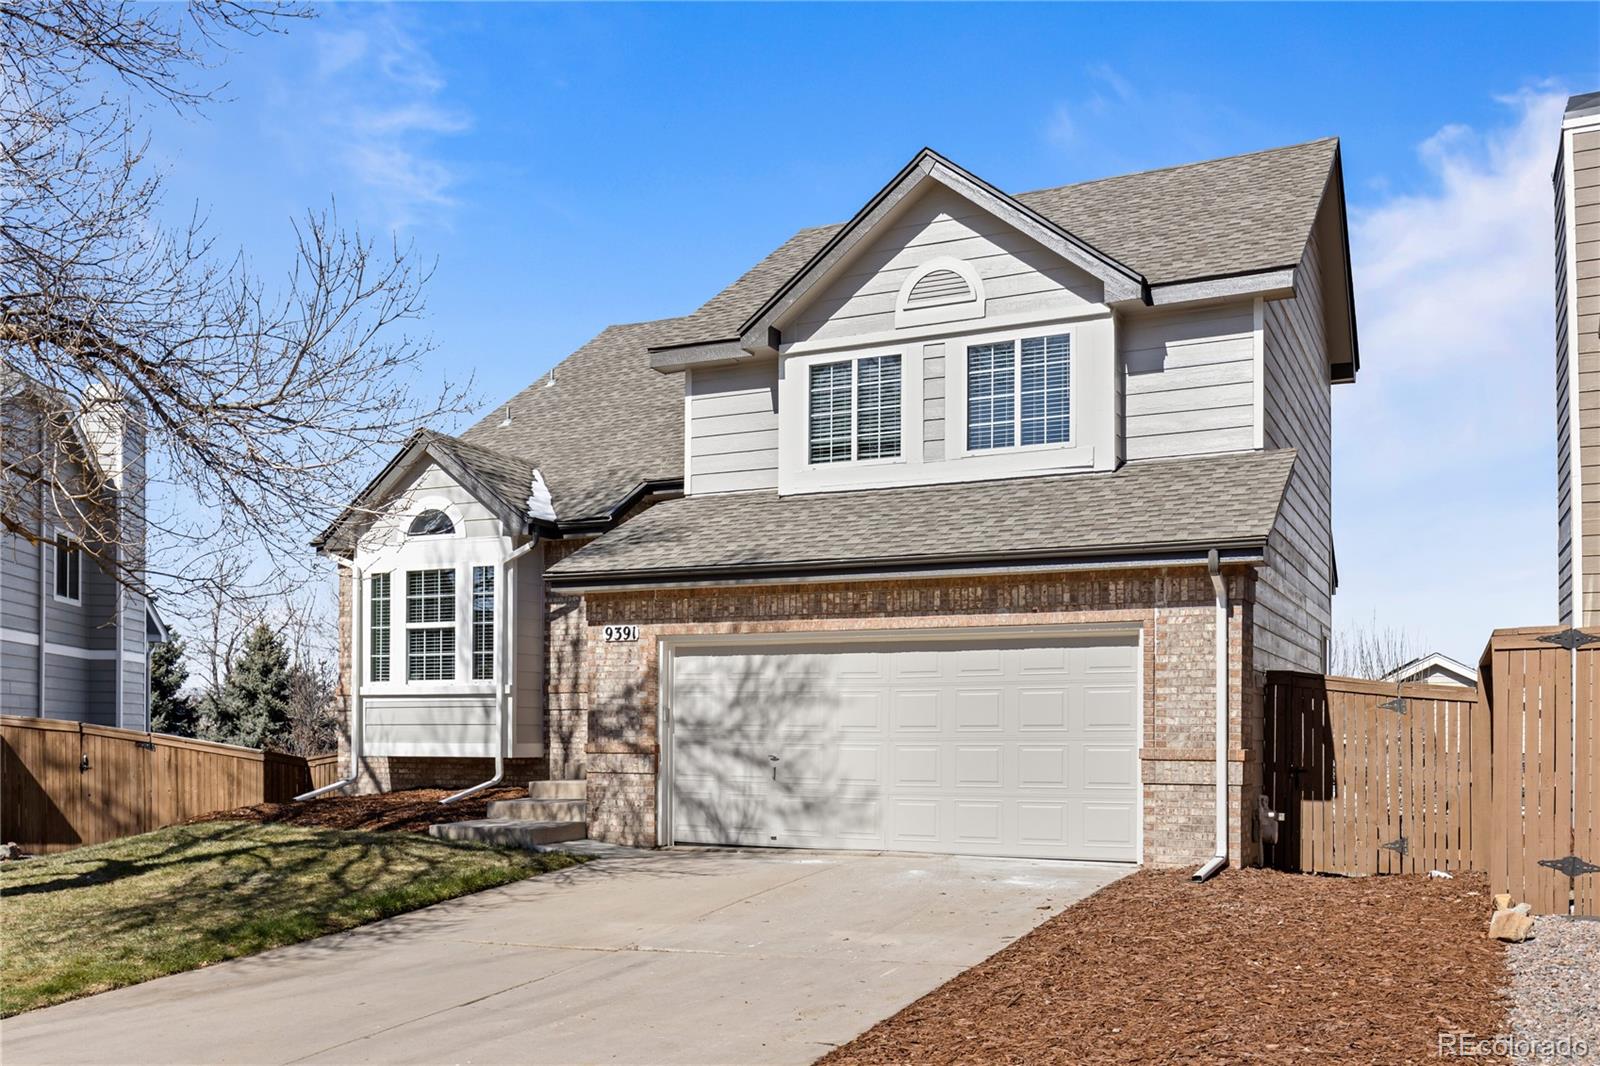 9391  princeton lane, highlands ranch sold home. Closed on 2024-04-30 for $720,000.